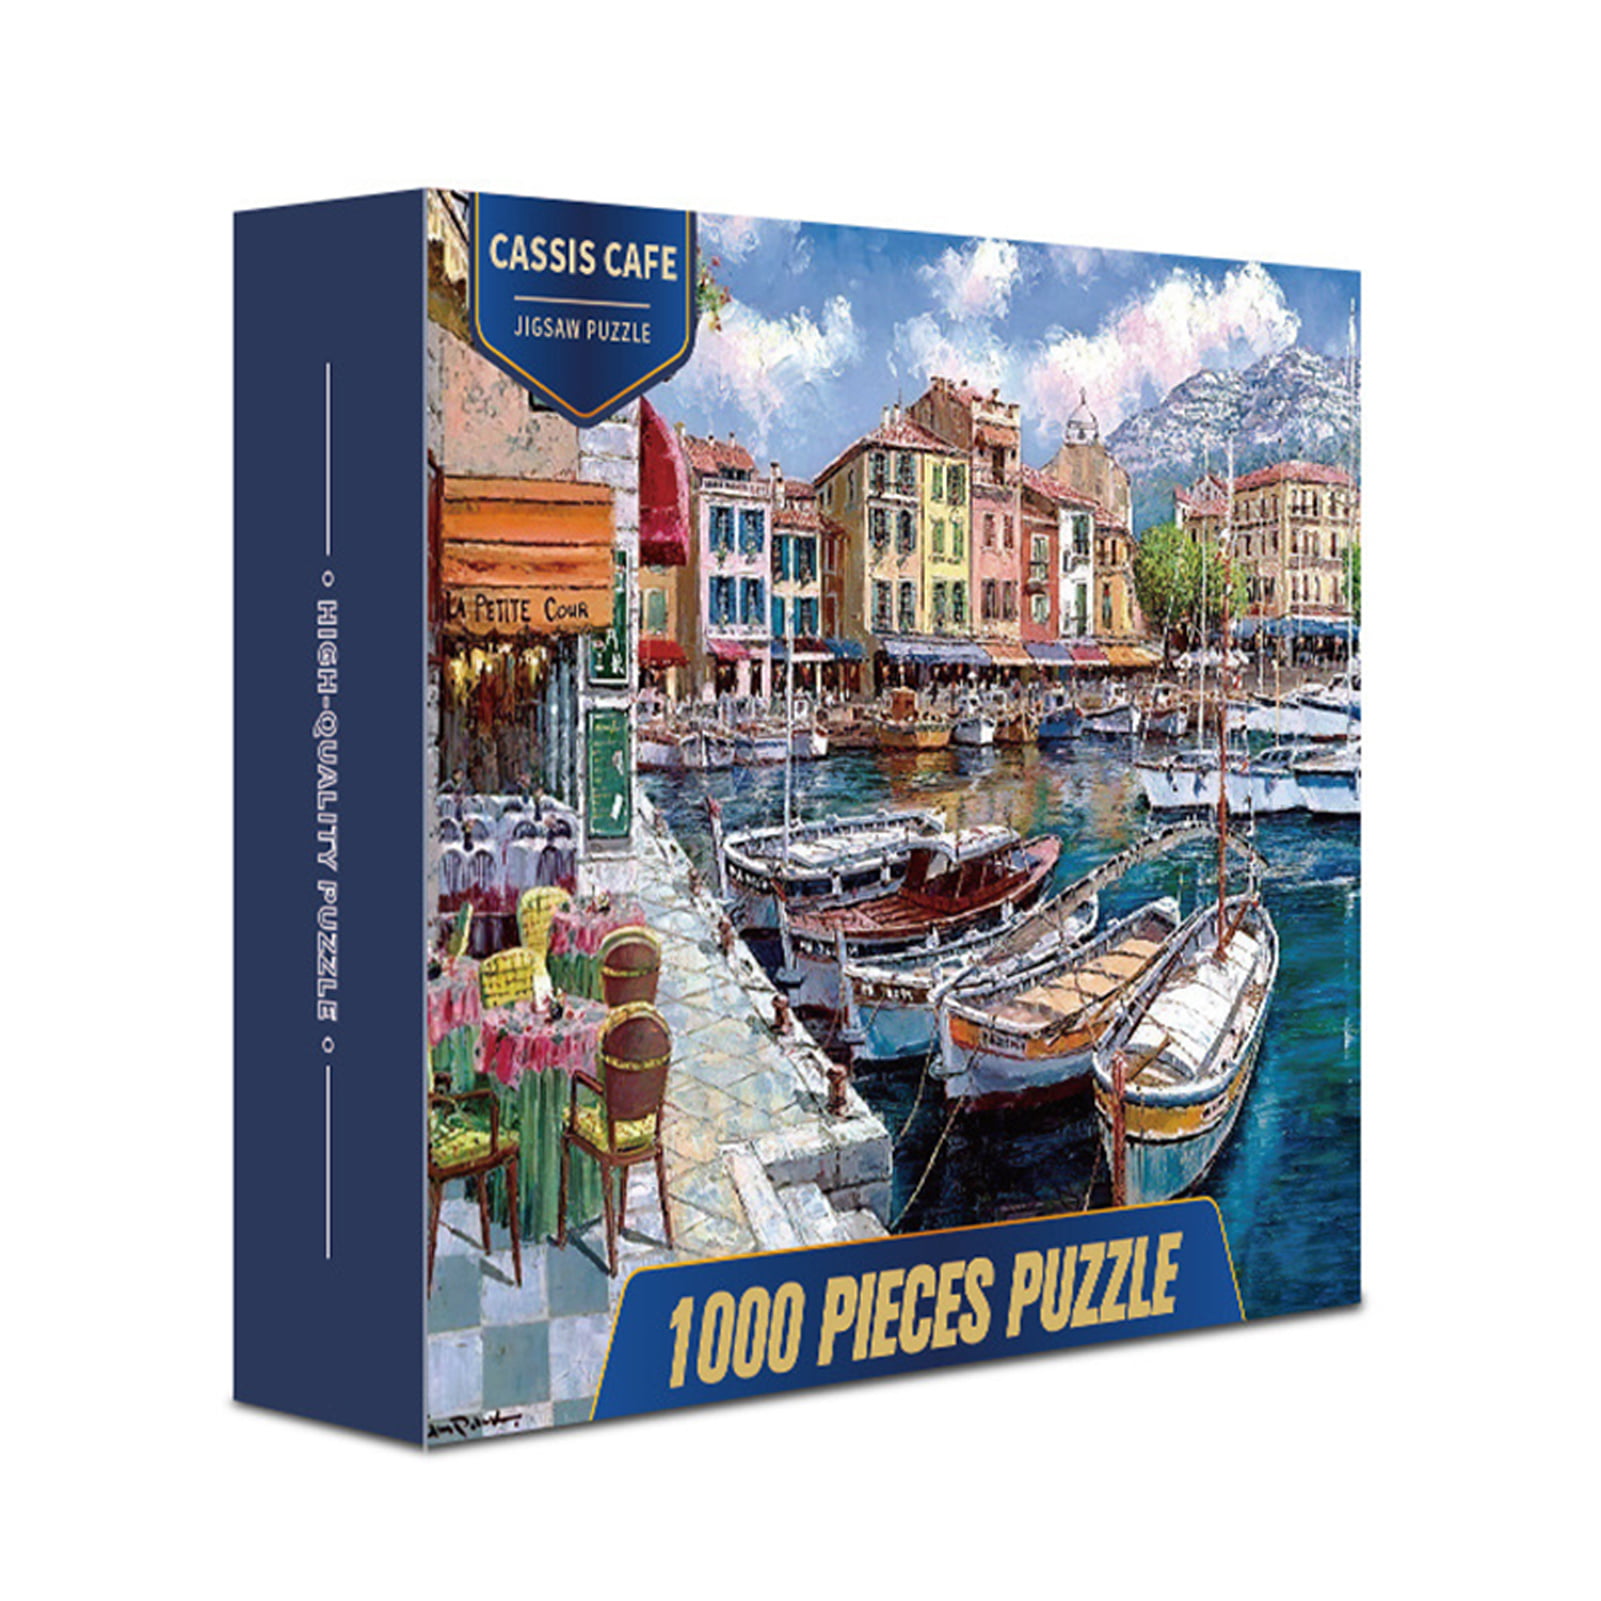 Jigsaw Puzzle 1000 Pieces Mediterranean Harbor Puzzle for Adults Teens Stress Relief Toys with 1000 Piece Puzzles for Family Game Gift Home Decor 